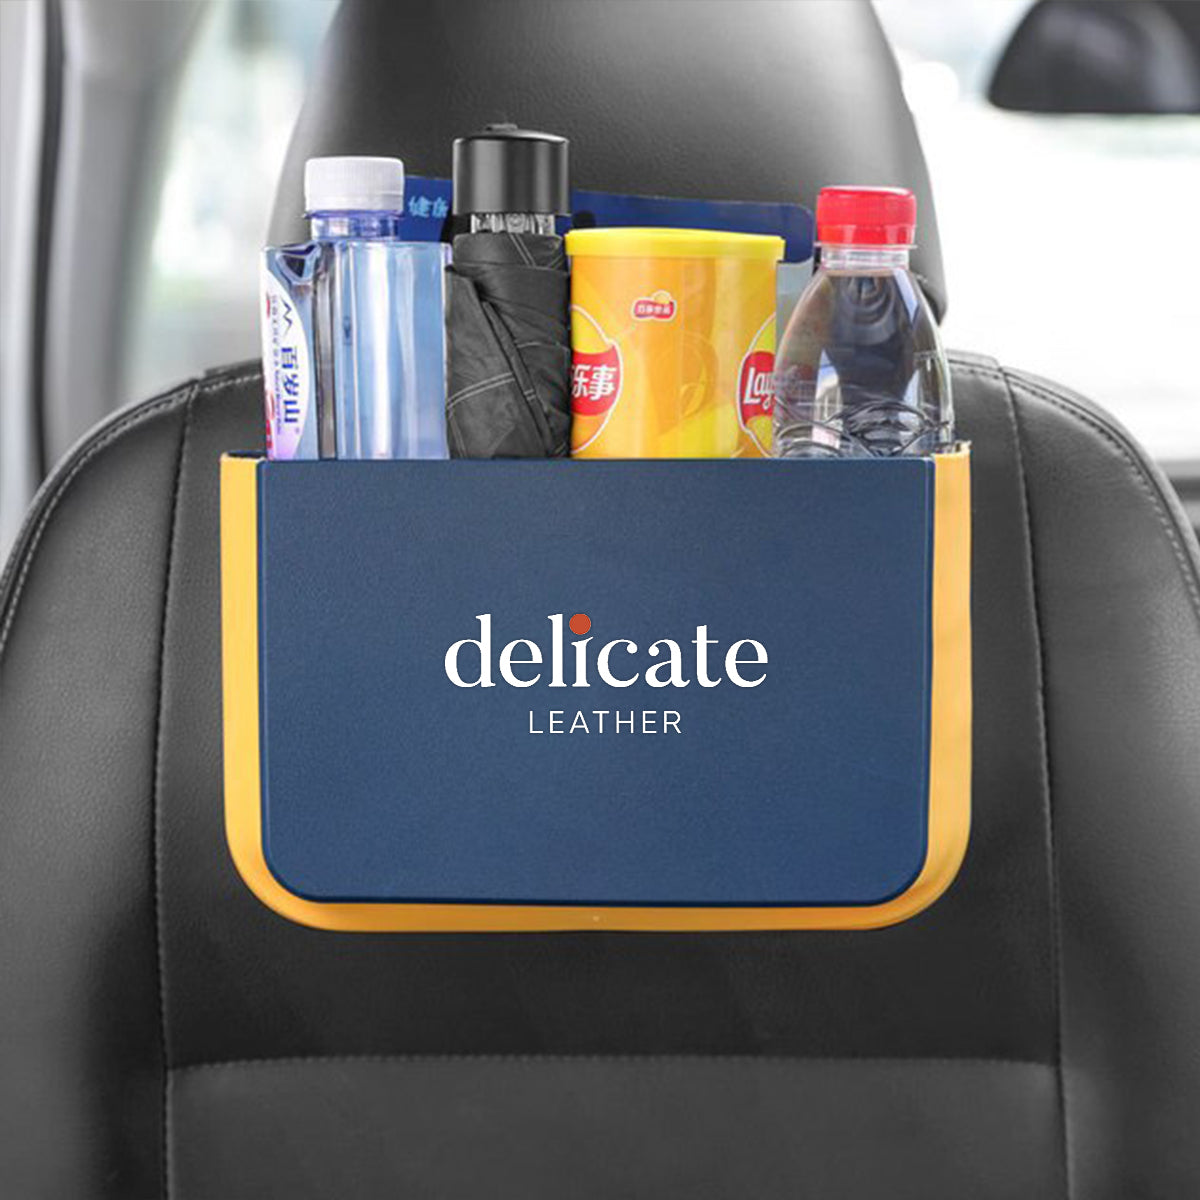 Hanging Waterproof Car Trash can-Foldable, Custom For Your Cars, Waterproof, and Equipped with Cup Holders and Trays. Multi-Purpose, Car Accessories FD11992 - Delicate Leather